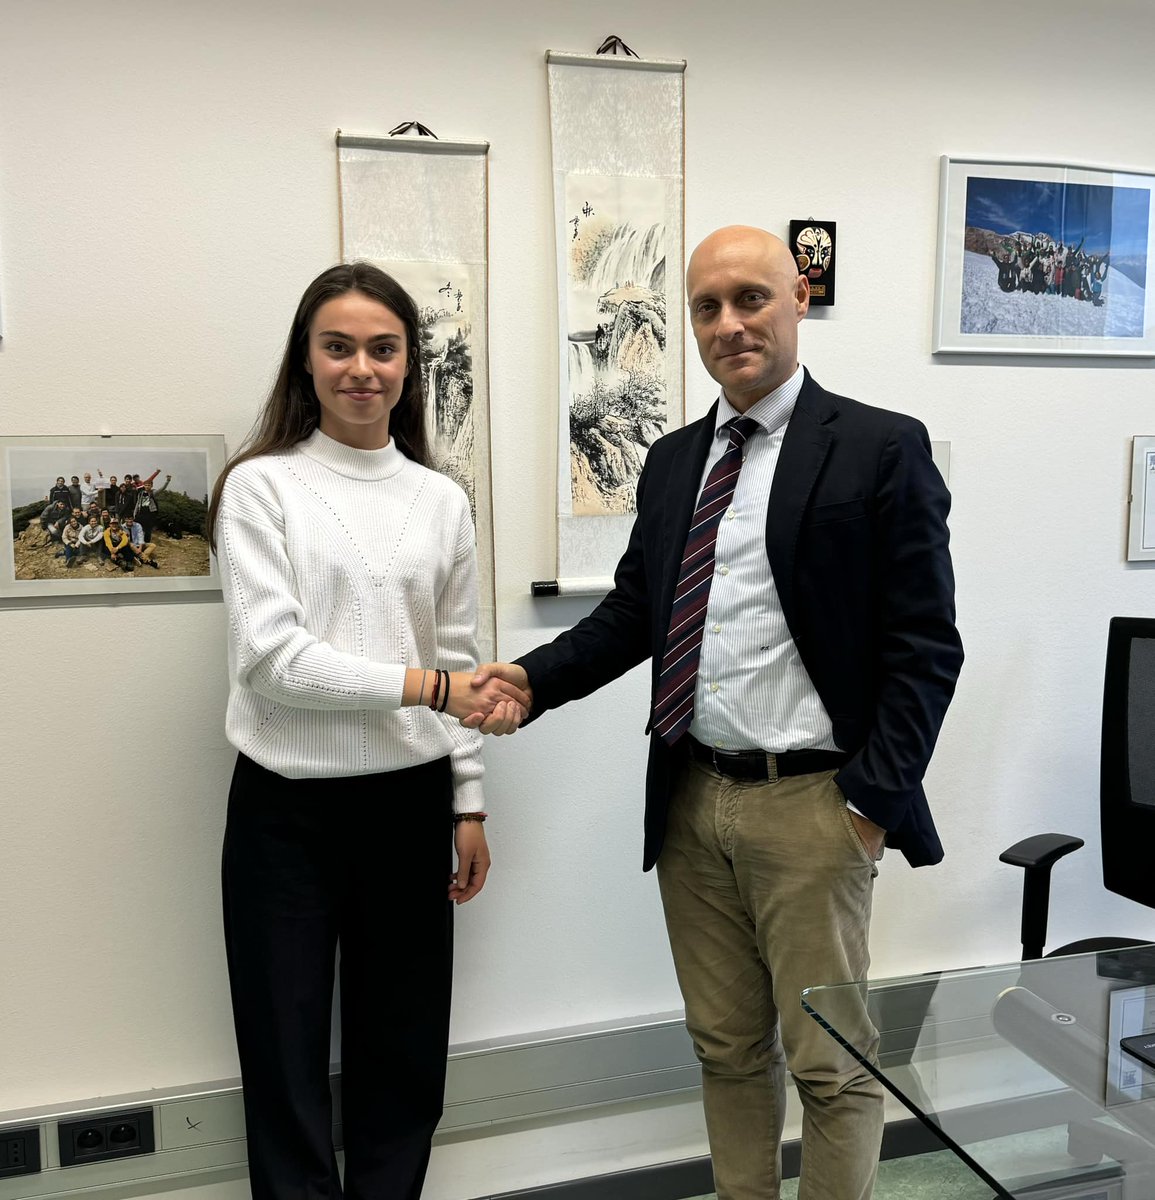 We are happy to welcome Eli Todorova to @TESAF_unipd  🇮🇹!

👉Eli is a student from @WUR 🇳🇱. She is doing an internship with our research group on #climatechange and #seawater intrusion in the Po River Delta. 

Our team is looking forward to sharing great experiences toghether!